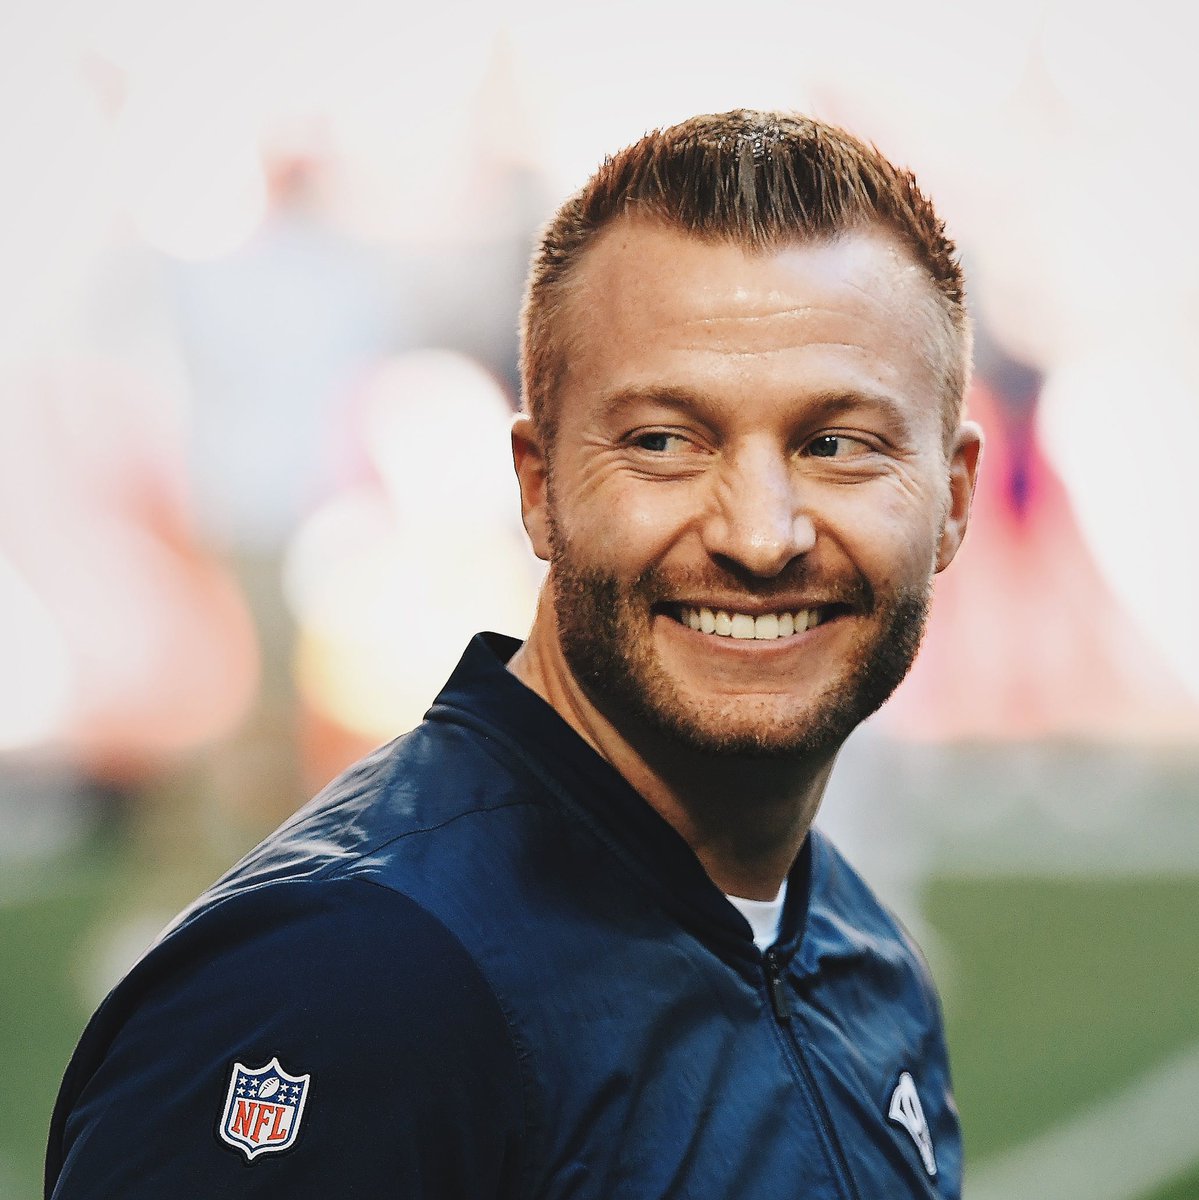 McVay With The Fresh Cut